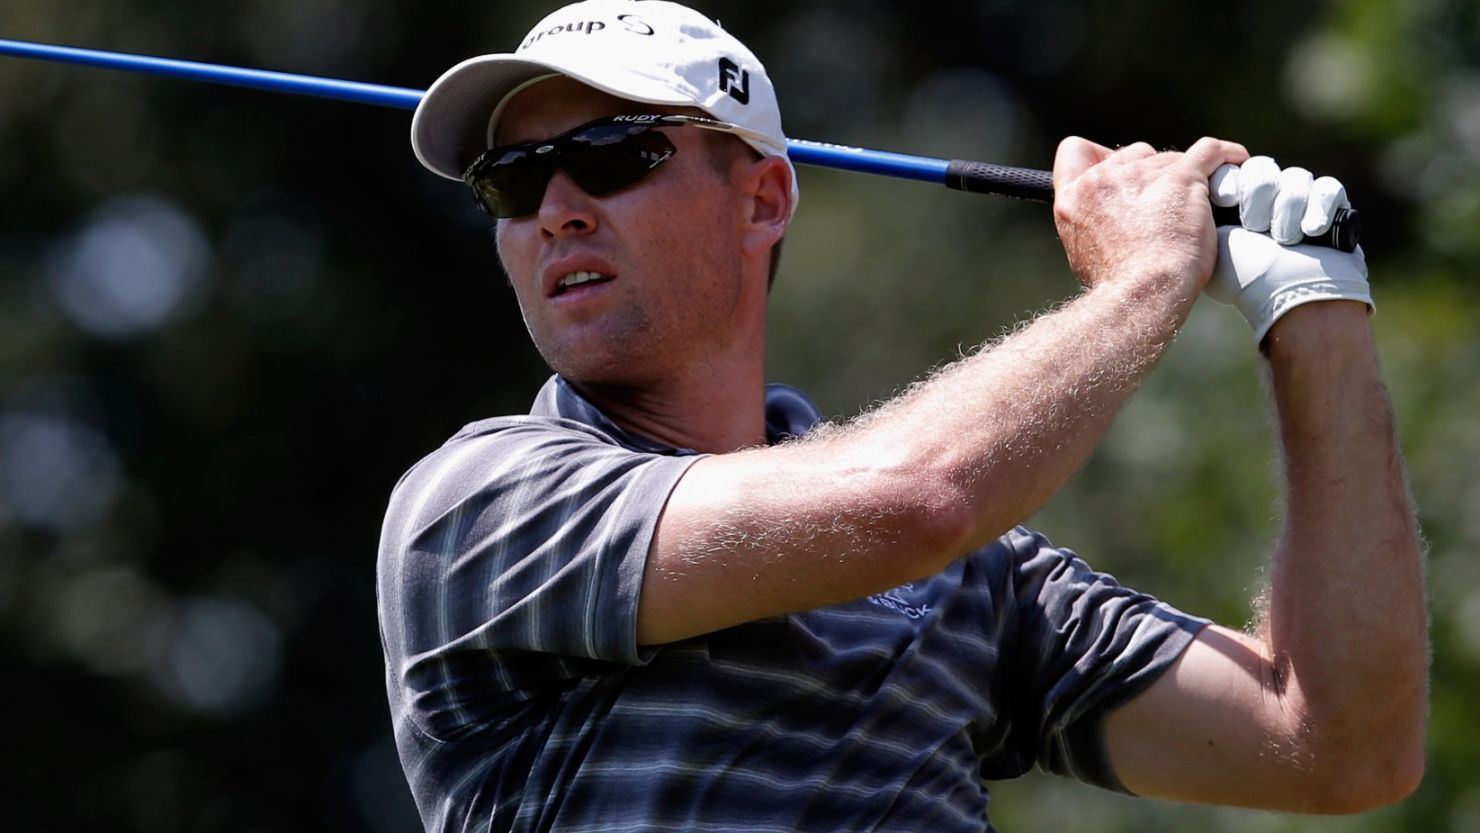 South African golfer Trevor Fisher Jnr.  was tied for the lead after three rounds of the Joburg Open.